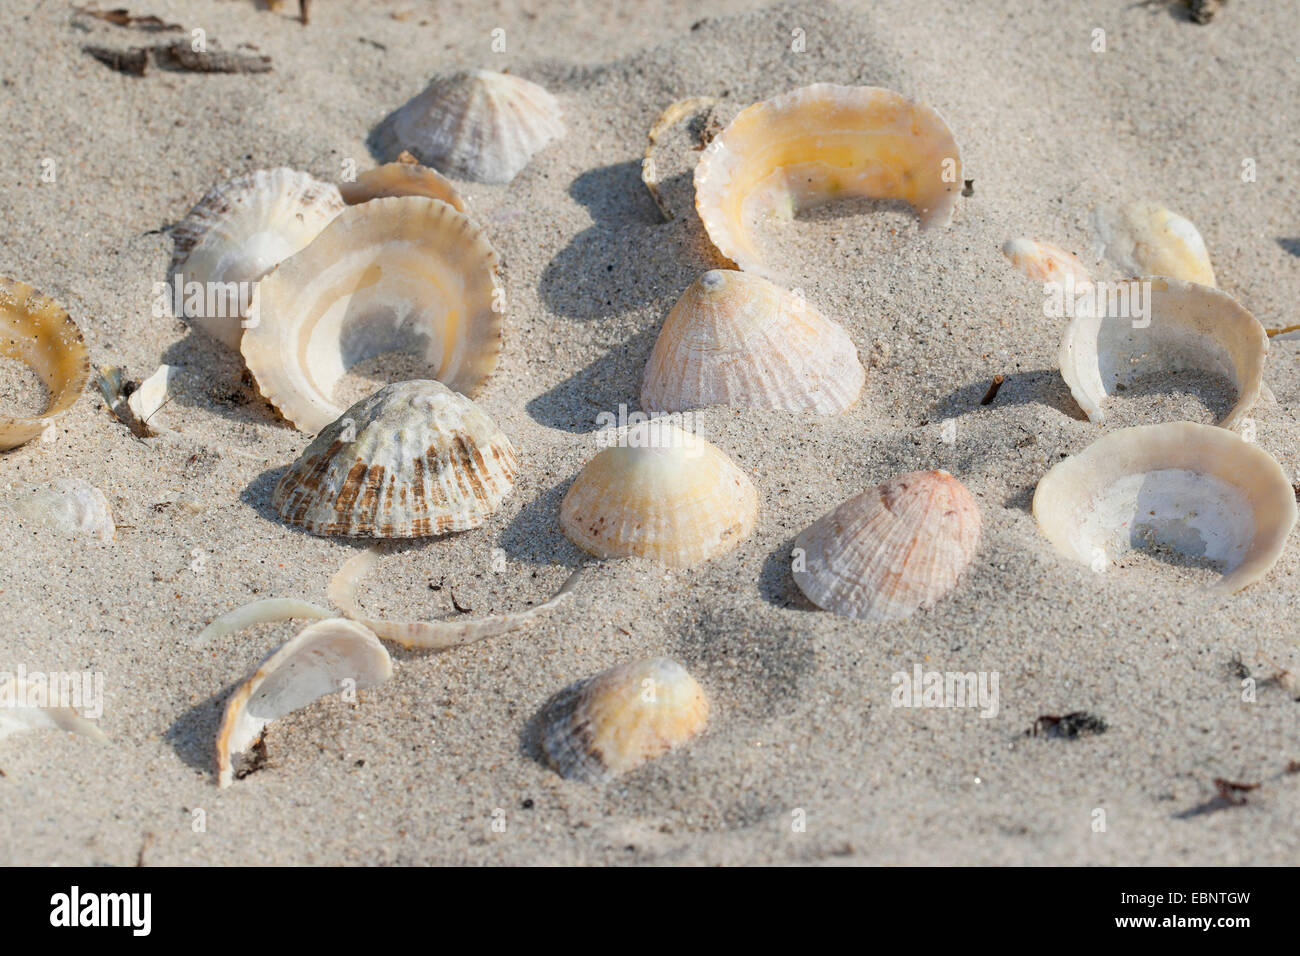 Common limpet, Common European limpet (Patella vulgata), washed up shelps lying in the sand, Germany Stock Photo